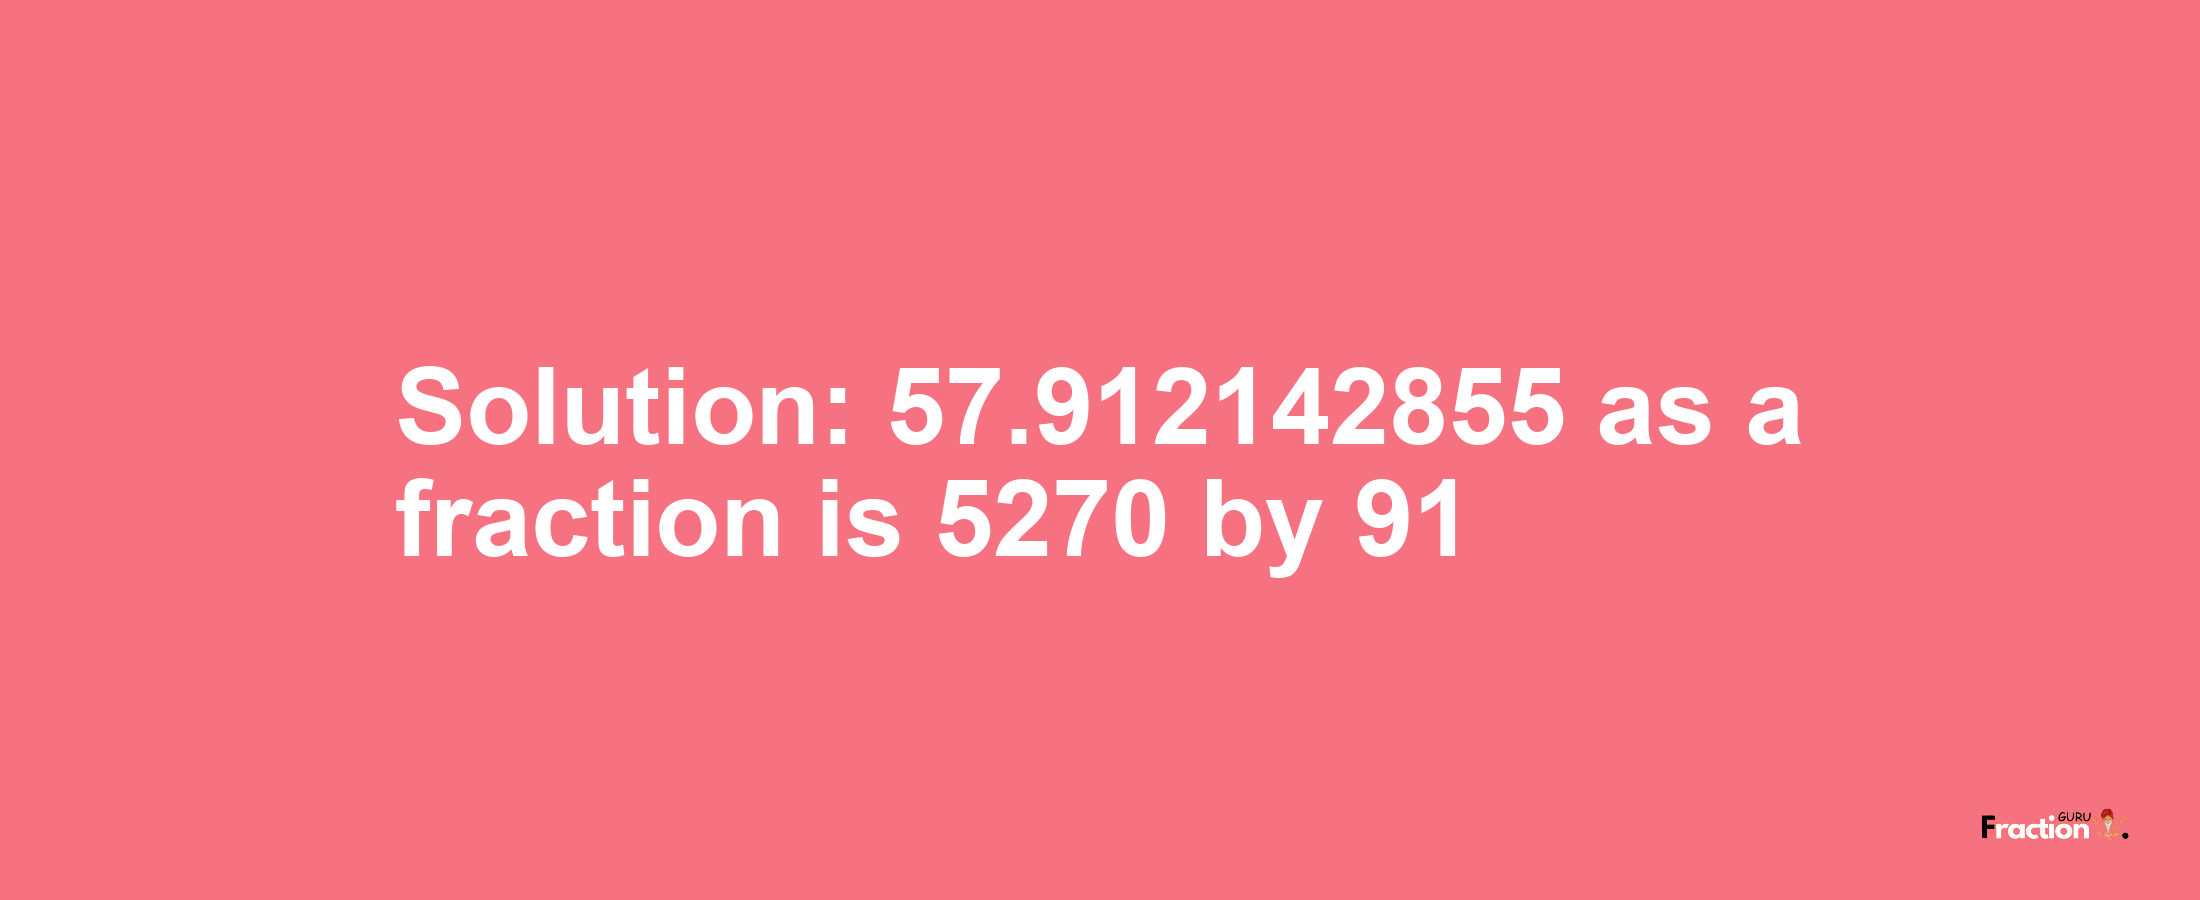 Solution:57.912142855 as a fraction is 5270/91